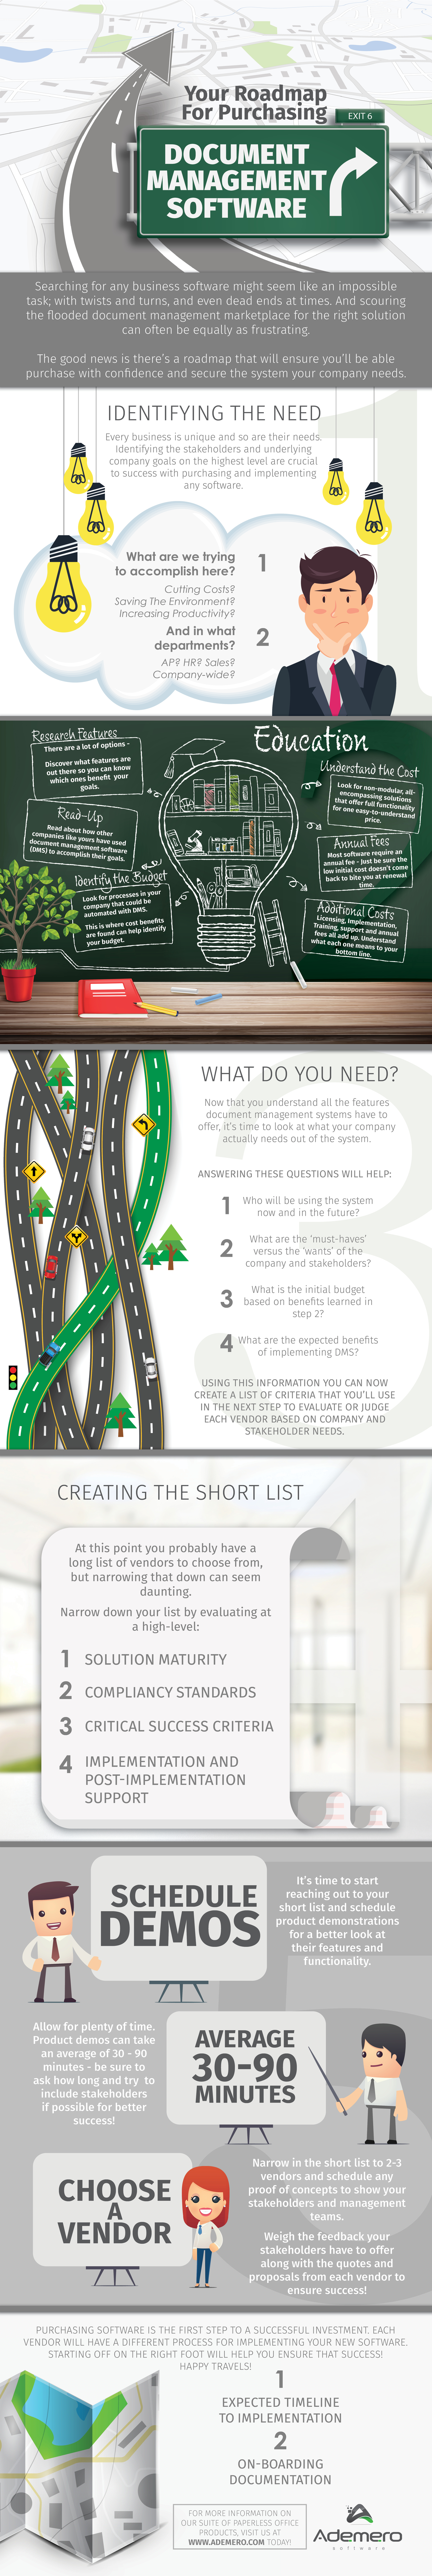 Roadmap for Purchasing Document Management Software - Infographic by Ademero Inc